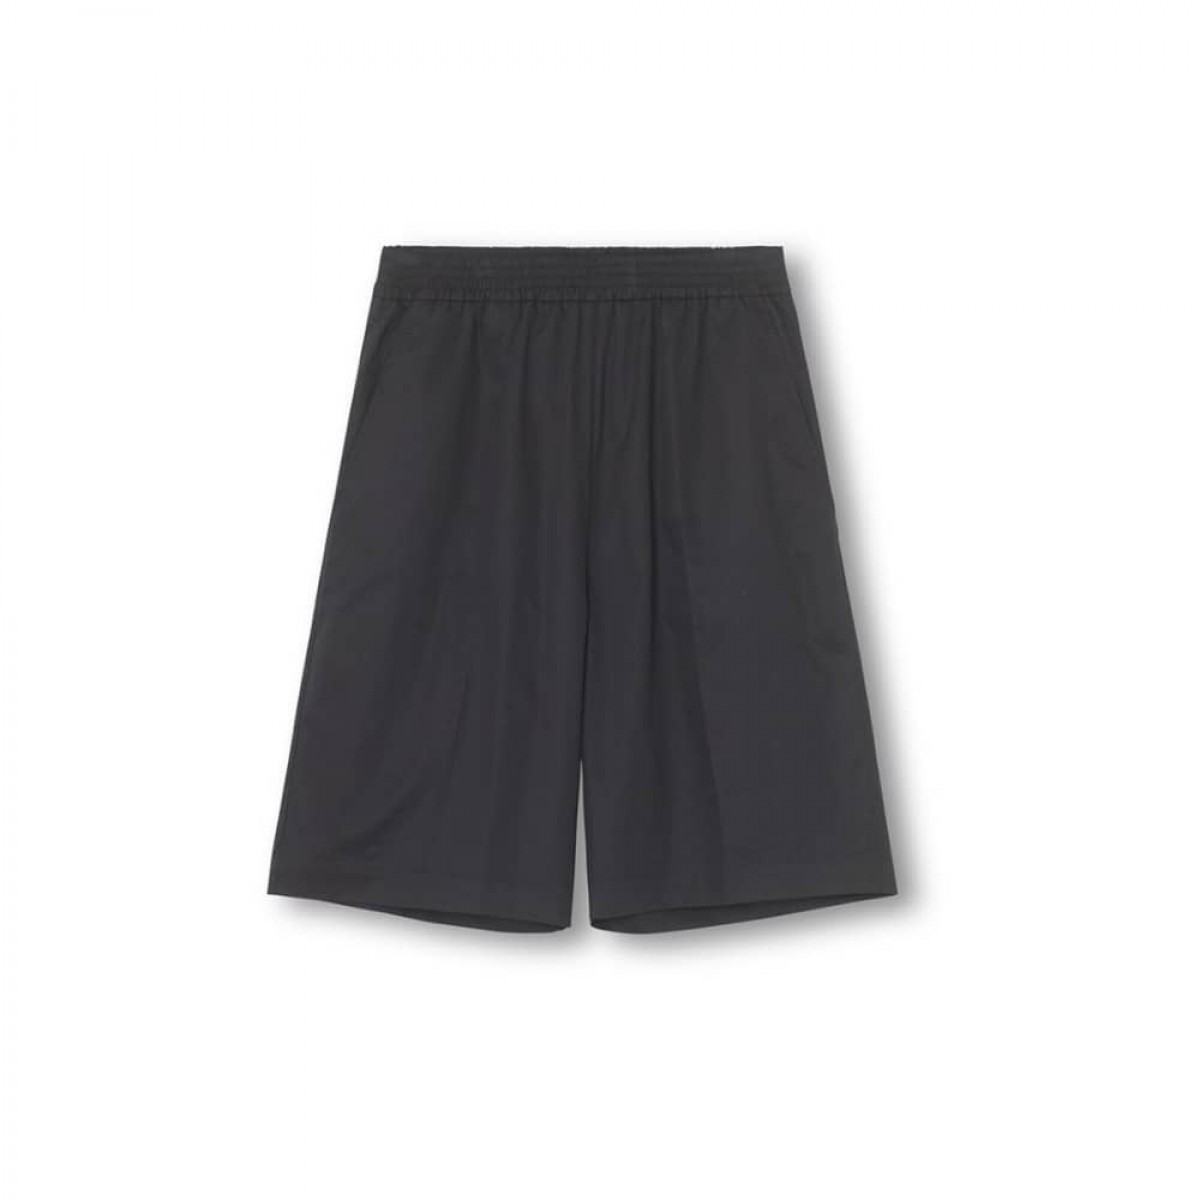 solo shorts - black - front